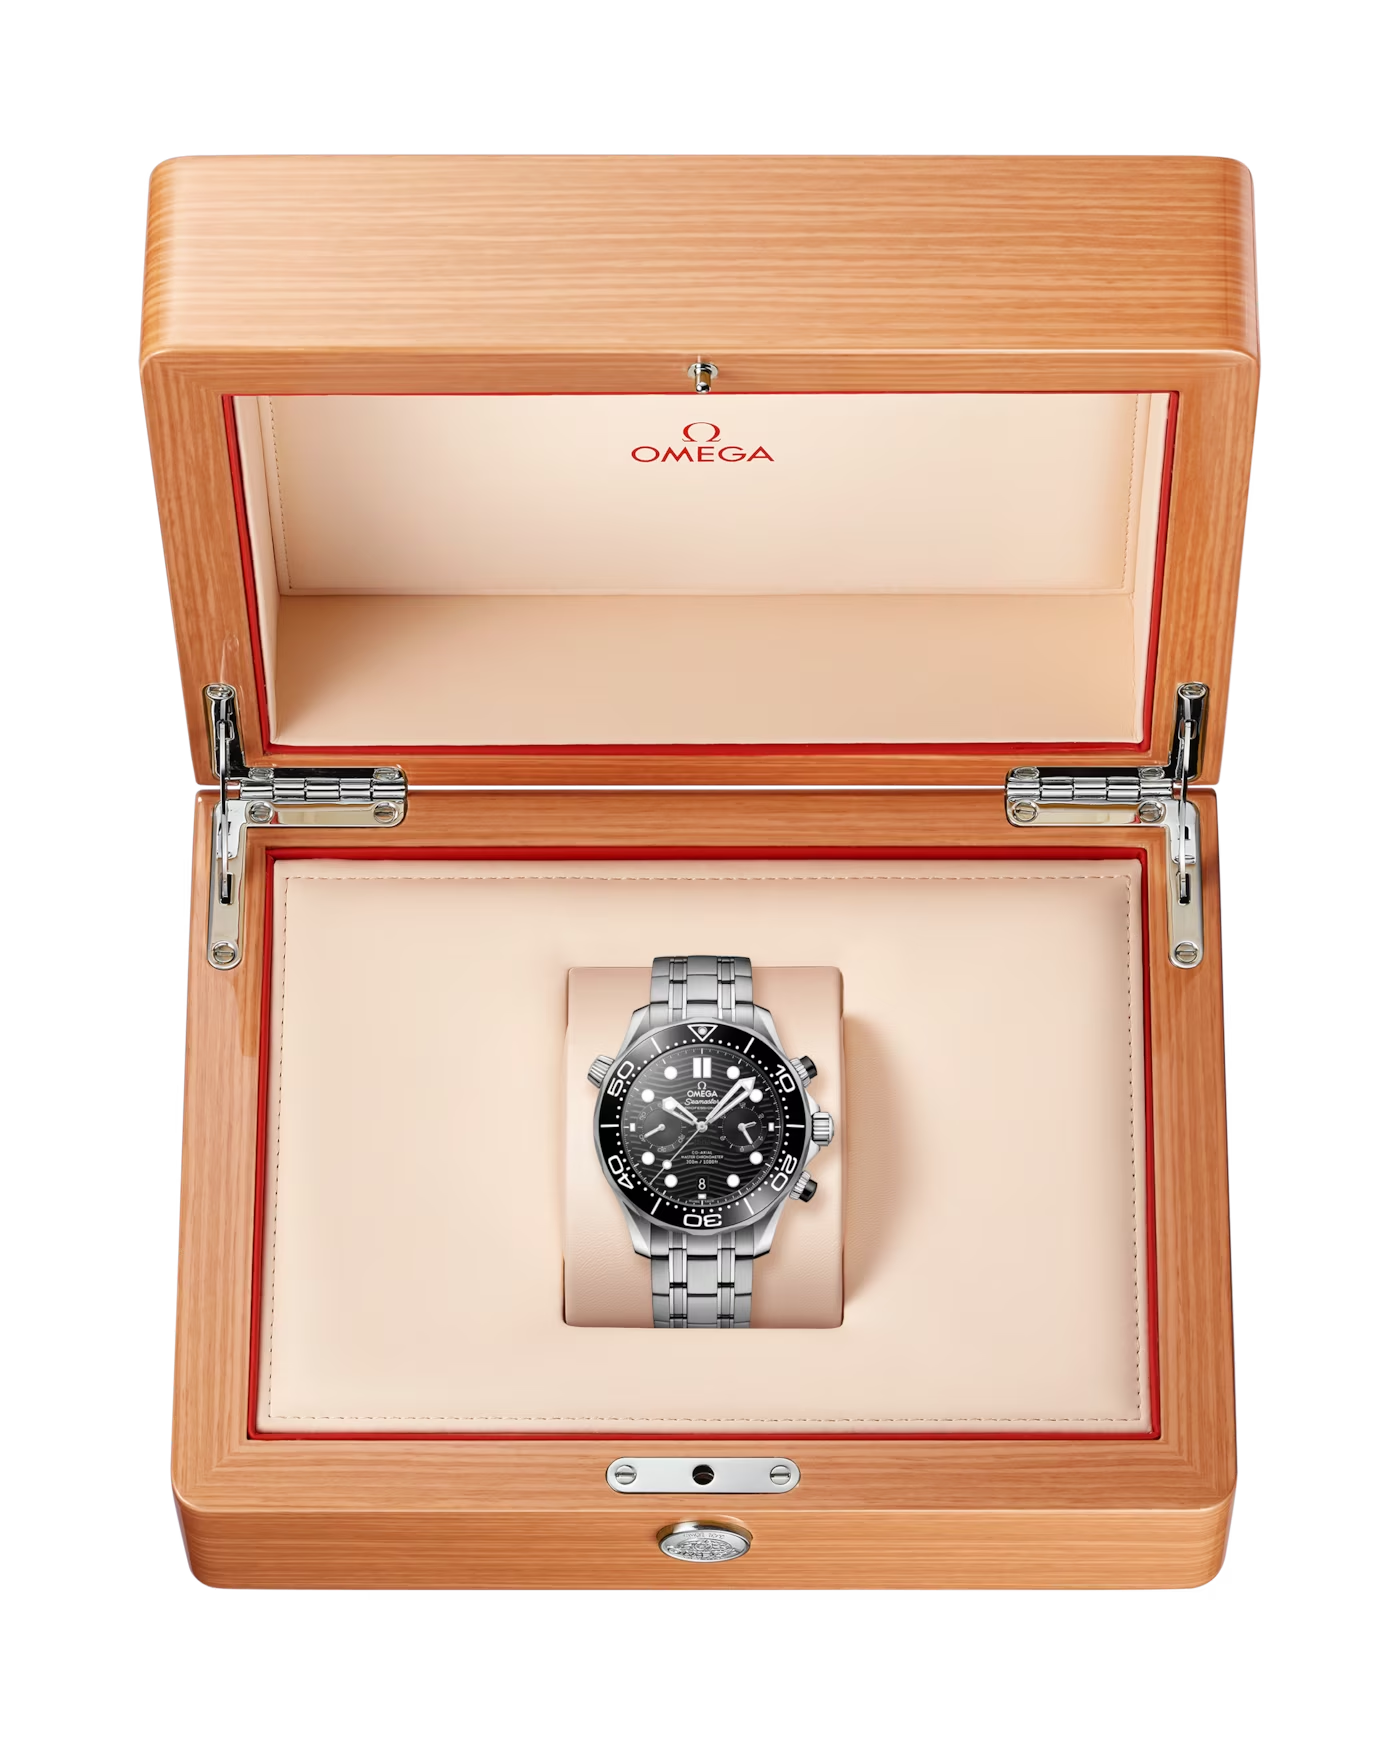 OMEGA-SEAMASTER DIVER 300M CO-AXIAL MASTER CHRONOMETER CHRONOGRAPH 44 MM 210.30.44.51.01.001